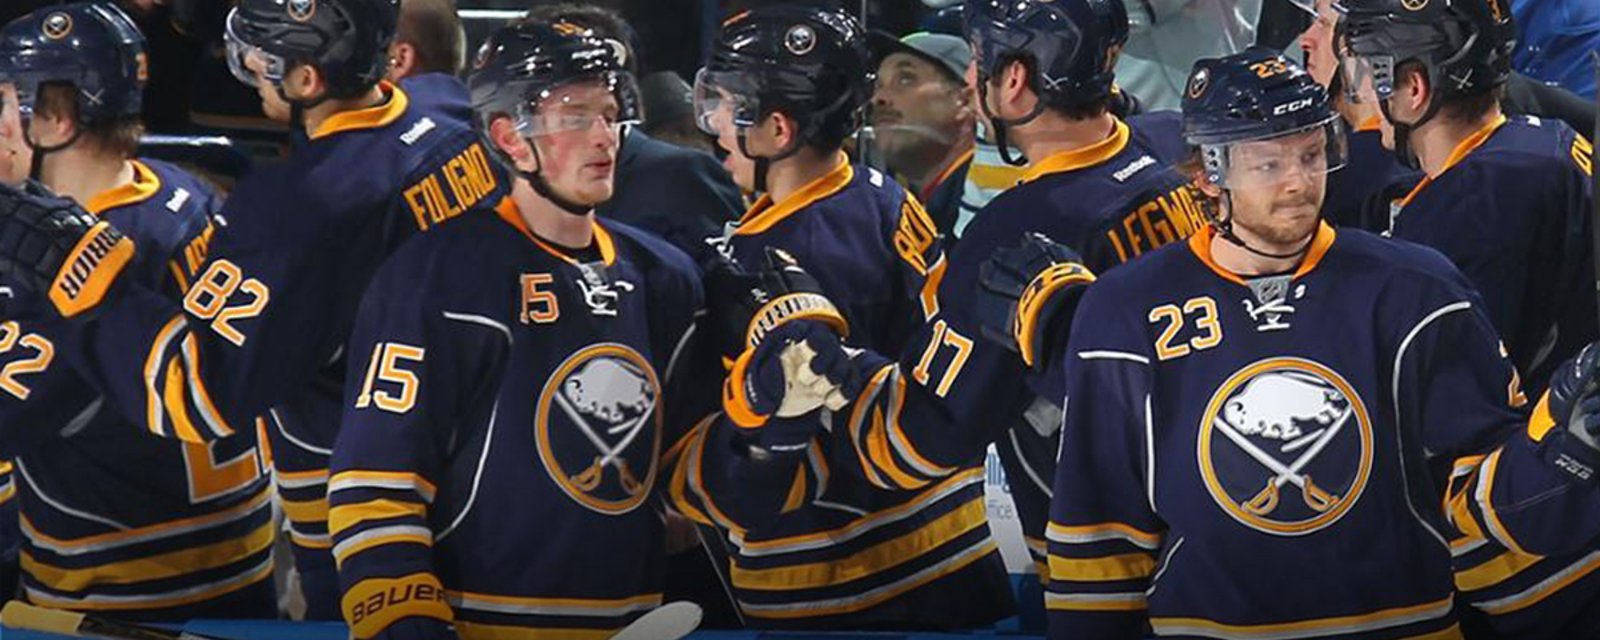 Report: Phil Housley made some changes to the lineup for tonight's game